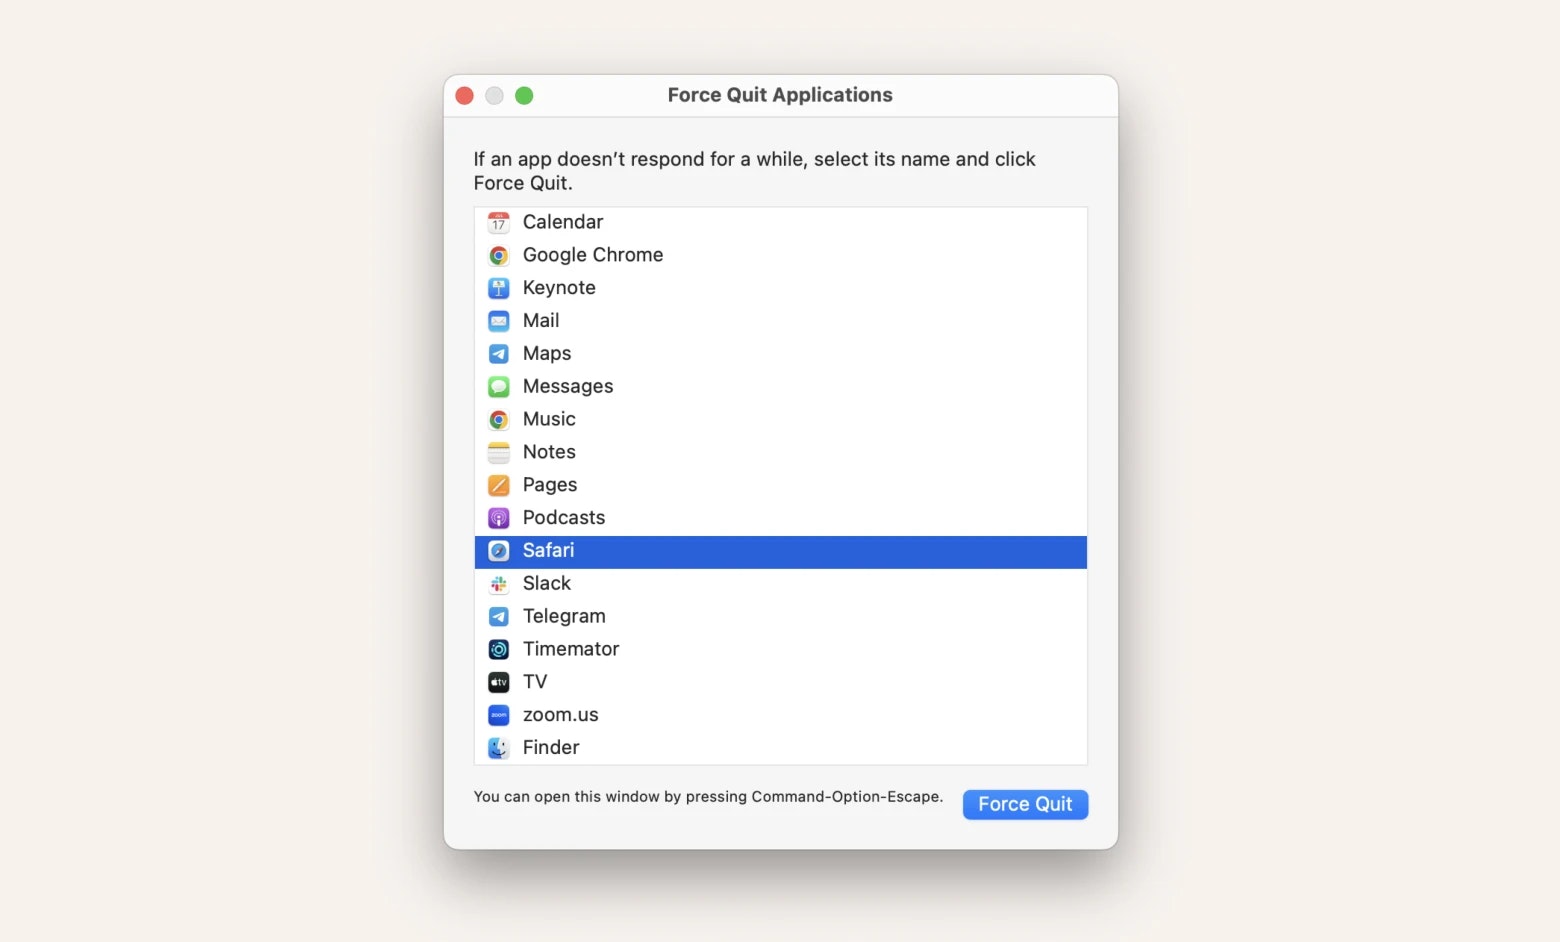 Force Quit Applications from Apple menu